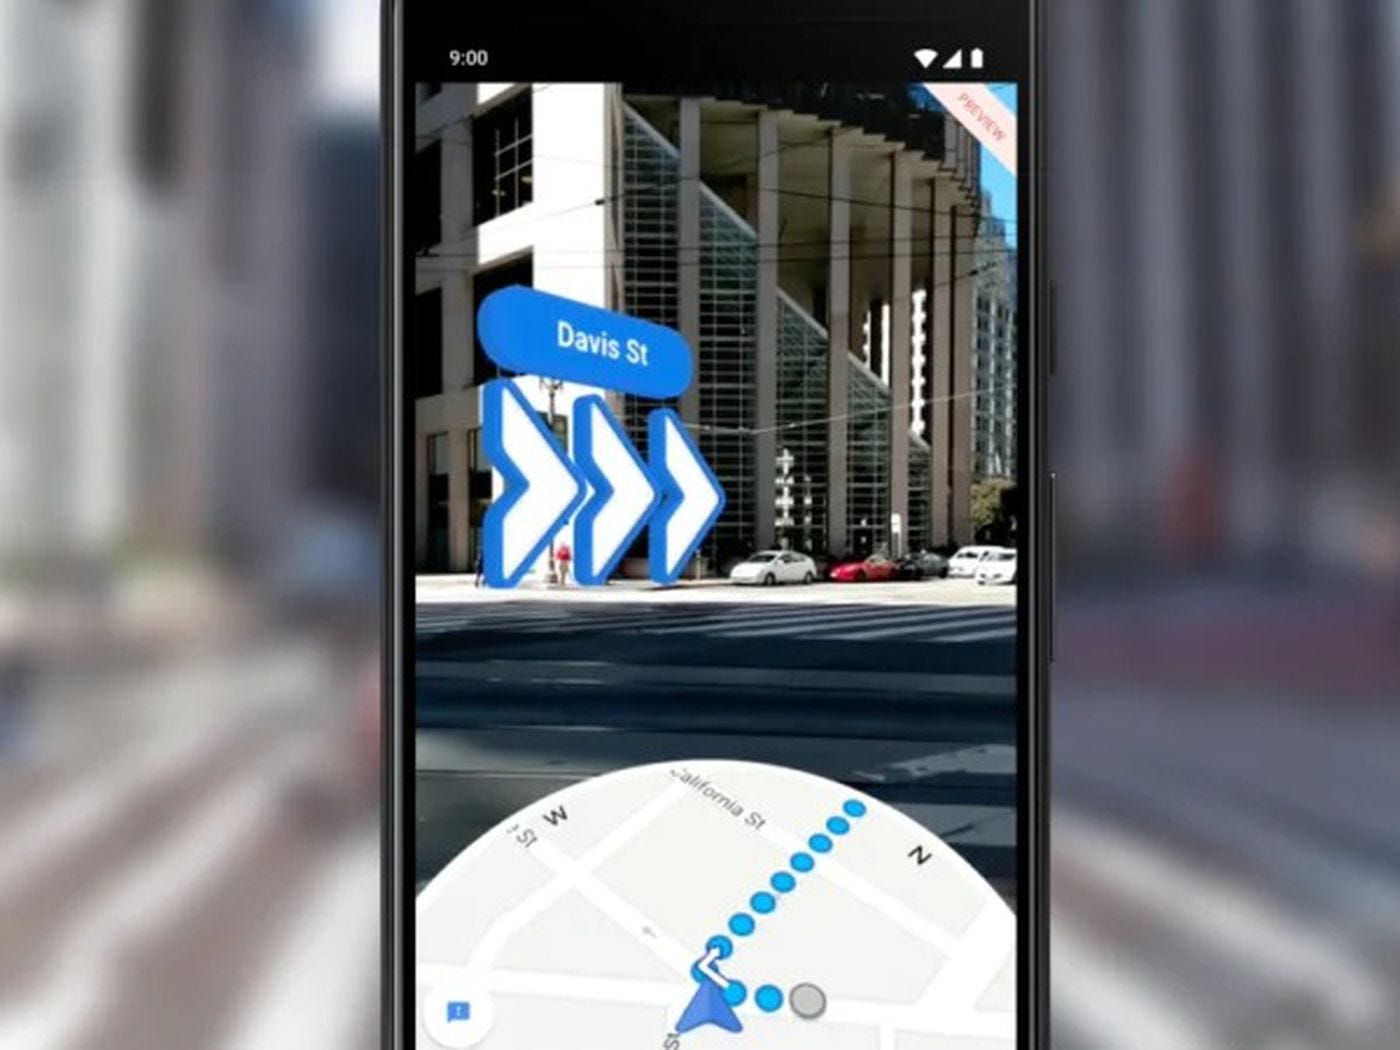 Google Maps AR walking directions arrive on iOS and Android - The Verge